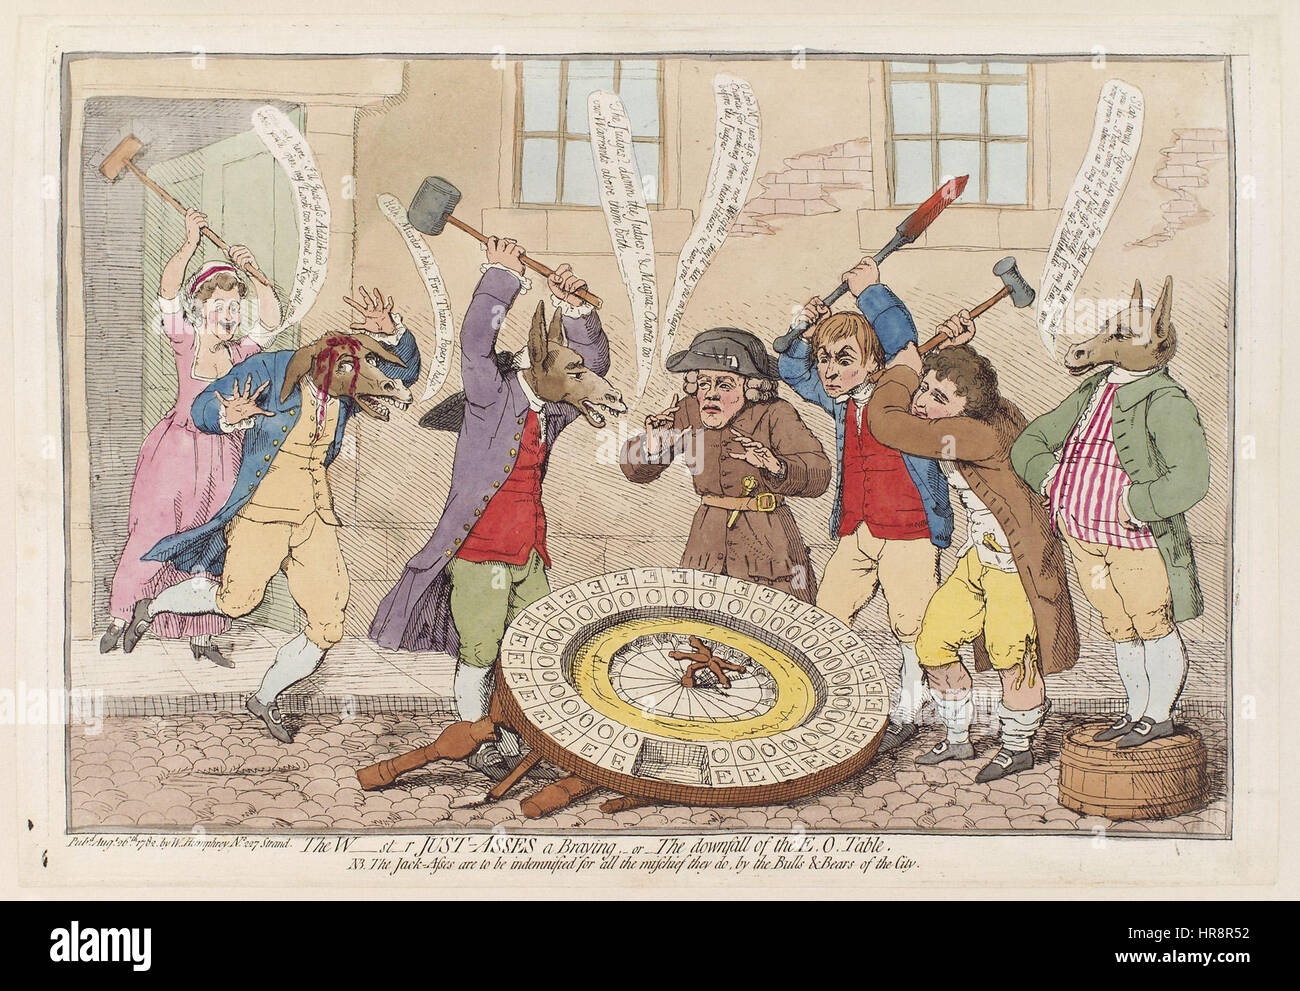 The W(estminster) just-asses a braying - or - the downfall of the E. O. table by James Gillray Stock Photo